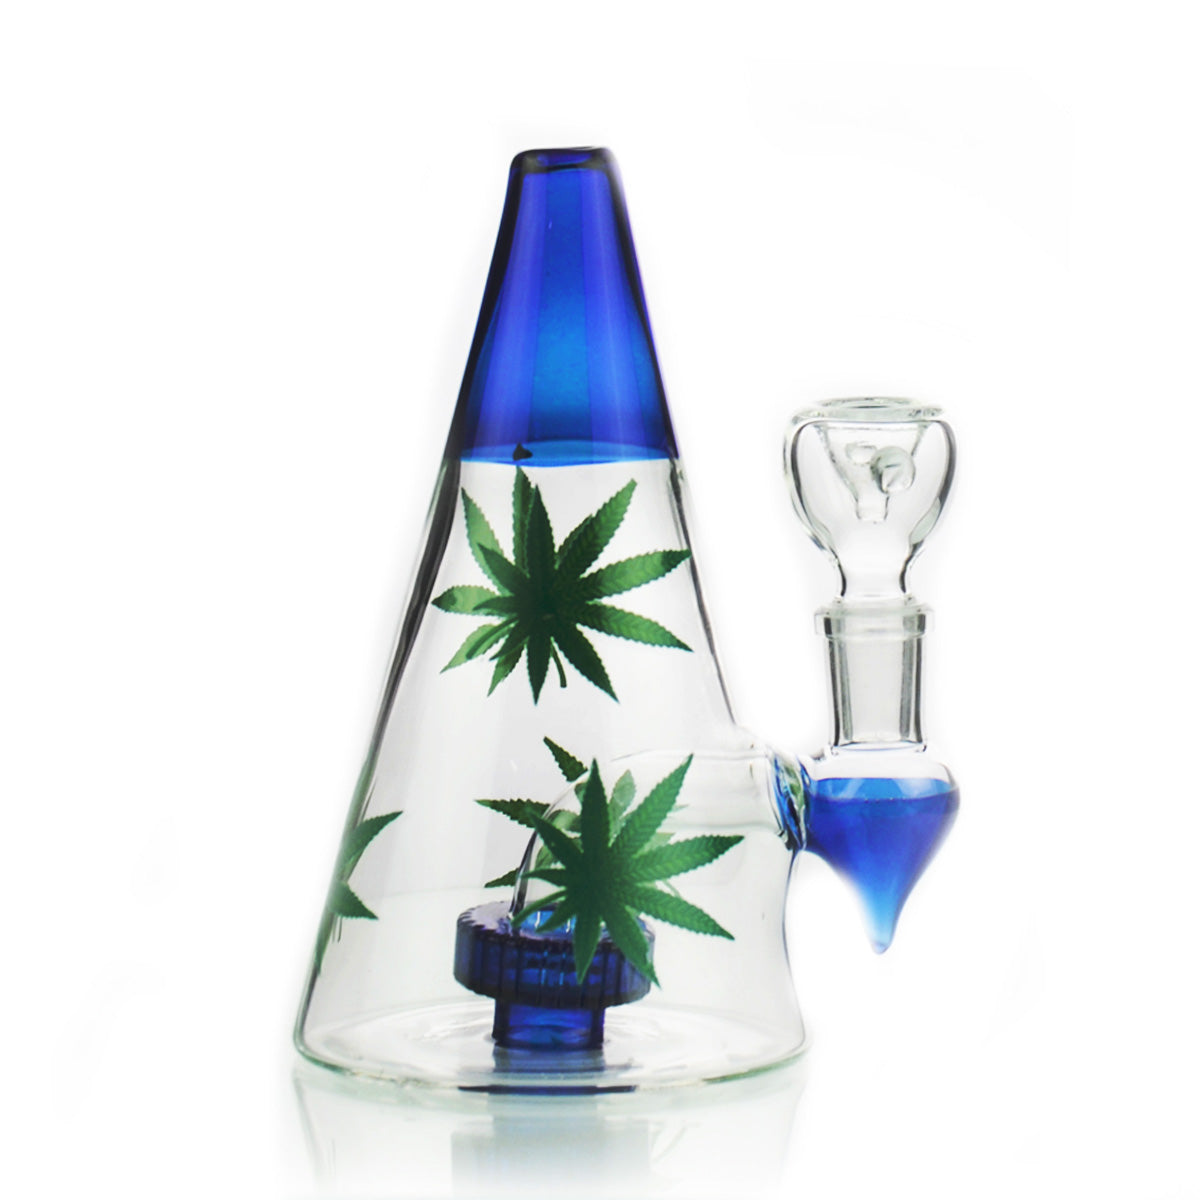 6'' Pyramid Bong with Metrix Shower and leaf 14mm Male Bowl Included